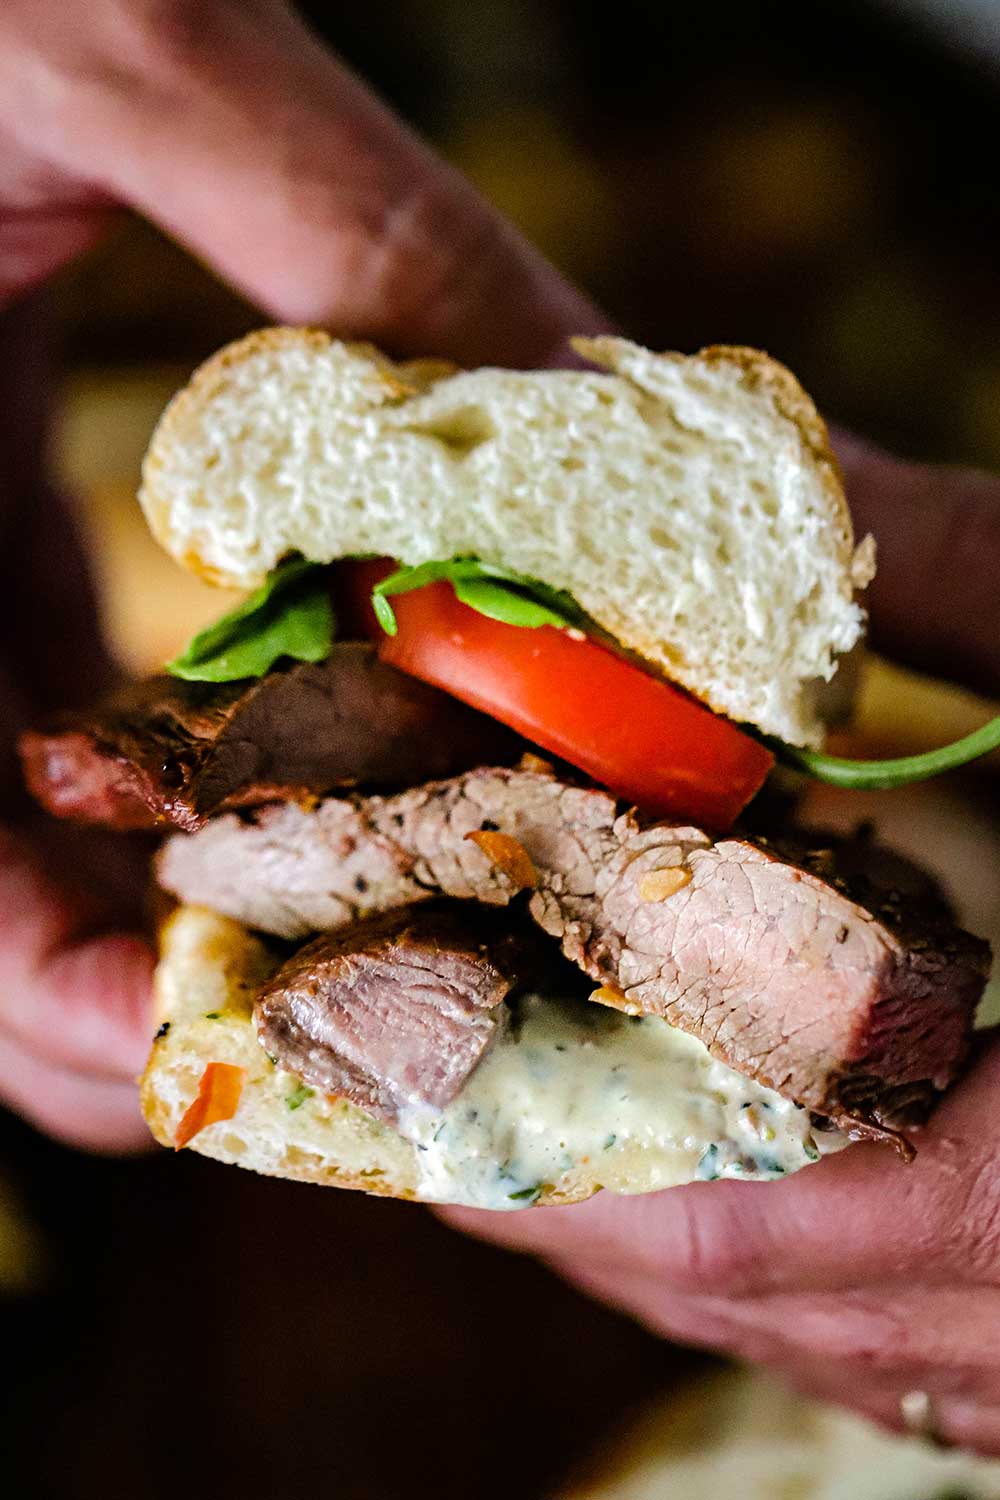 A close-up view of a grilled steak sandwich that is cut in half and is being held a pair of hands. 